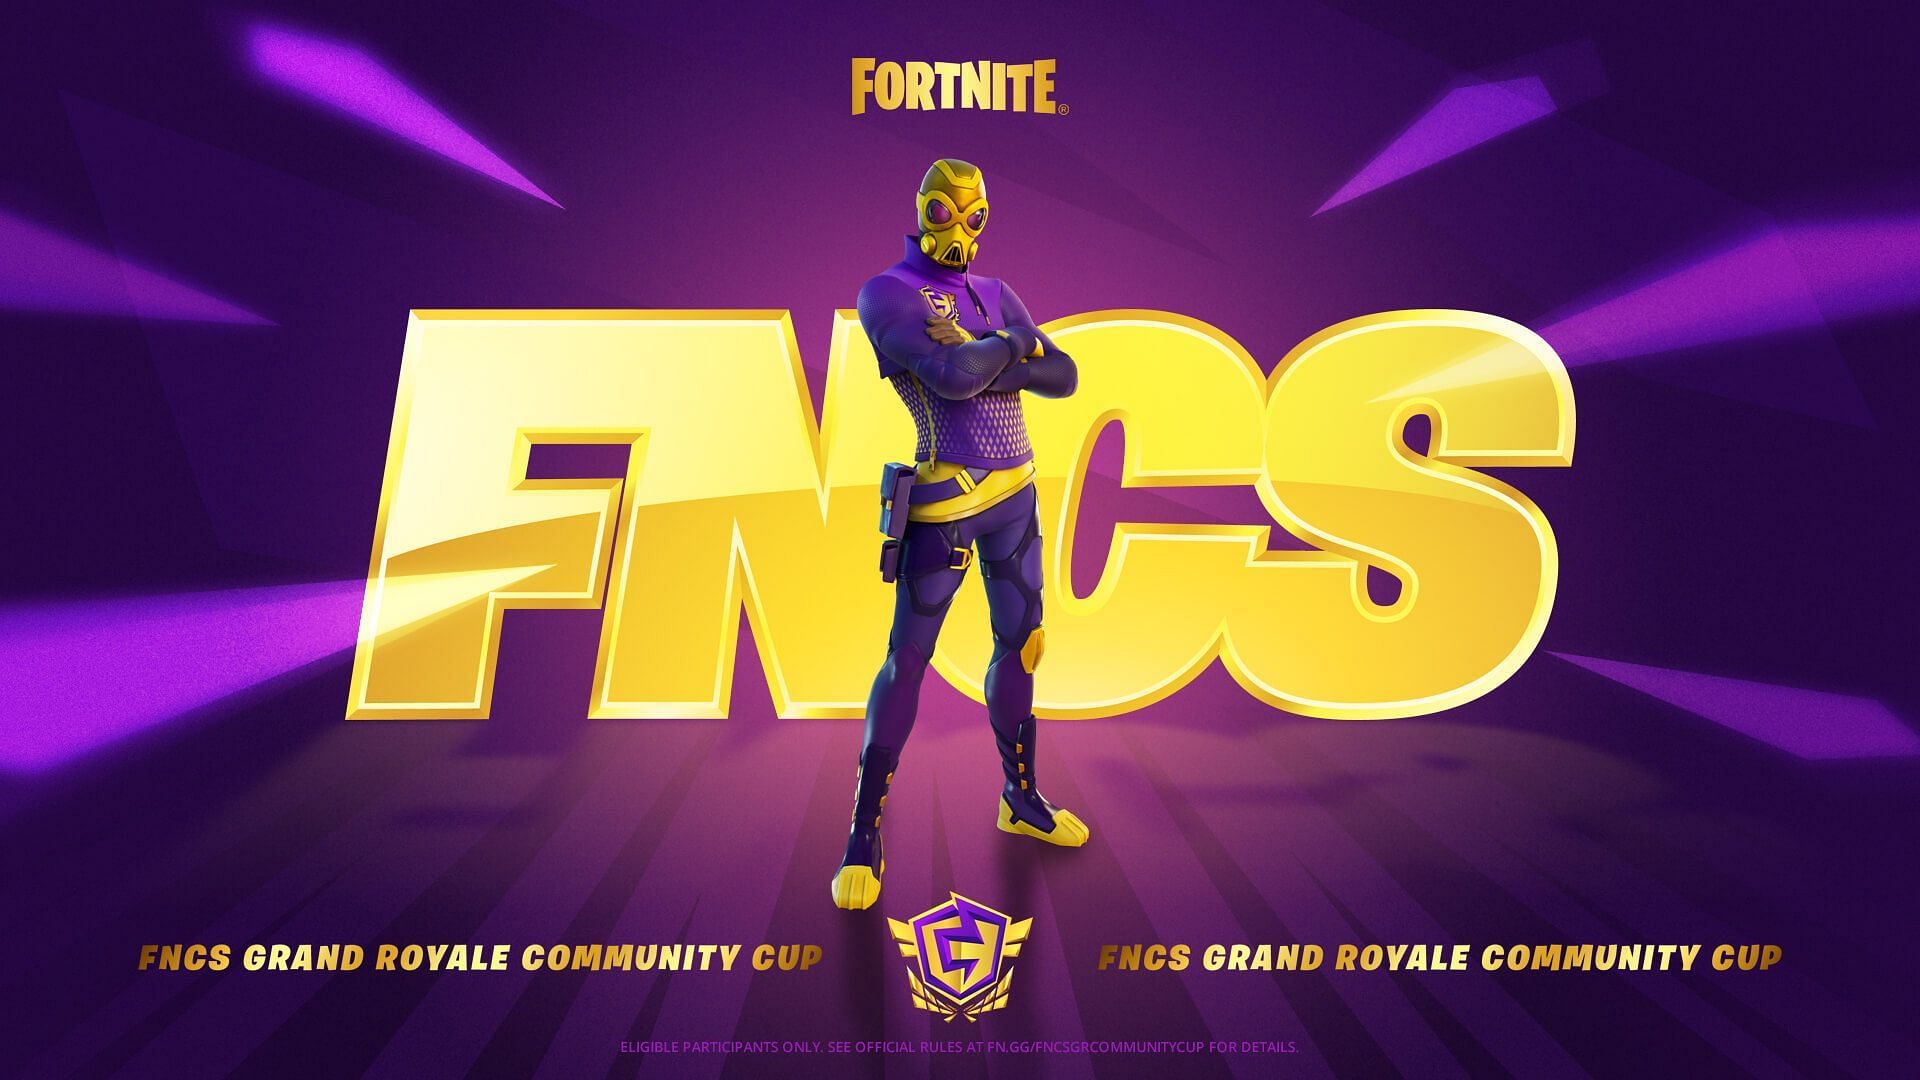 FNCS Grand Royale Community Cup participants were wrongly given this skin. (Image via Epic Games)